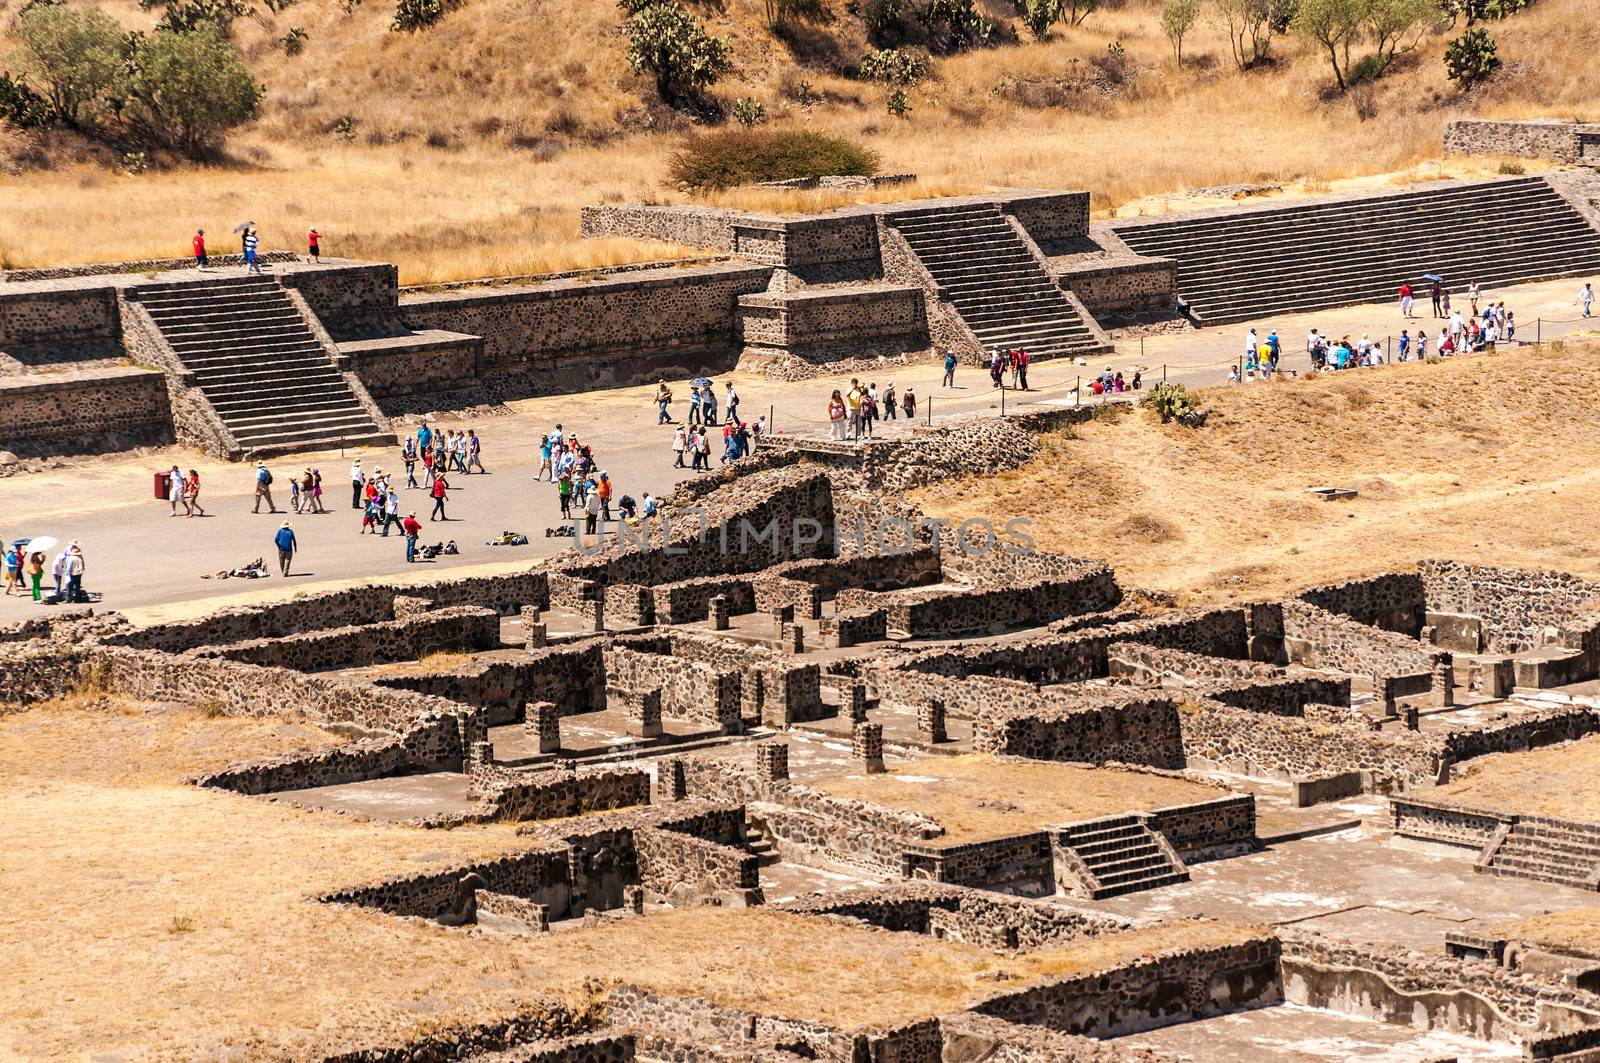 The ancient ruined city of Teotihuacan near Mexico City